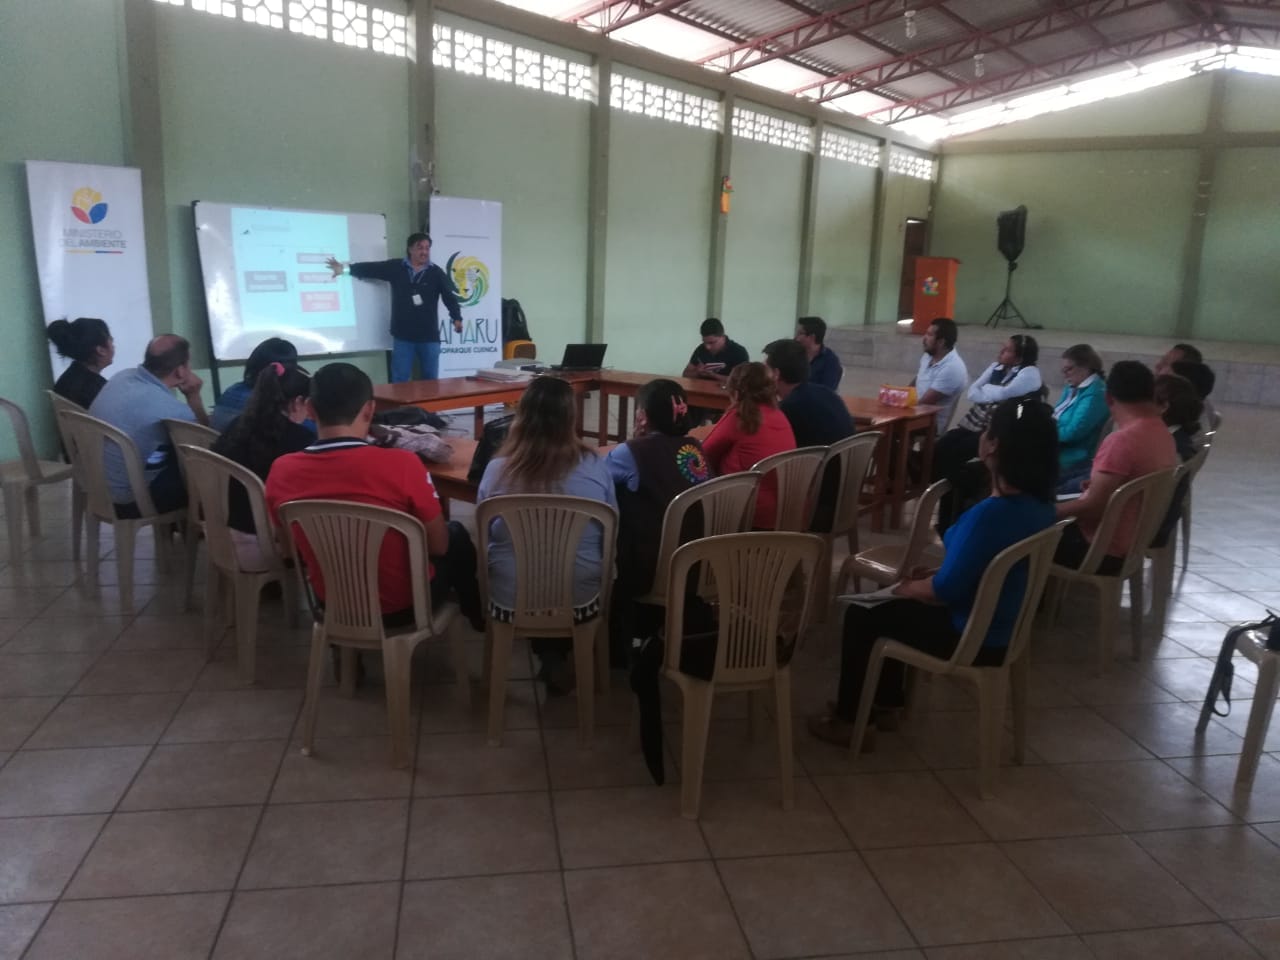 Zoo-Bioparque-Amaru-Cuenca-AMARU SUPPORTING THE FIRST WORKSHOP ON ENVIRONMENTAL EDUCATION, BIODIVERSITY AND CONSERVATION DIRECTED TO TEACHERS OF THE EDUCATIONAL UNITS OF THE PROVINCE OF AZUAY